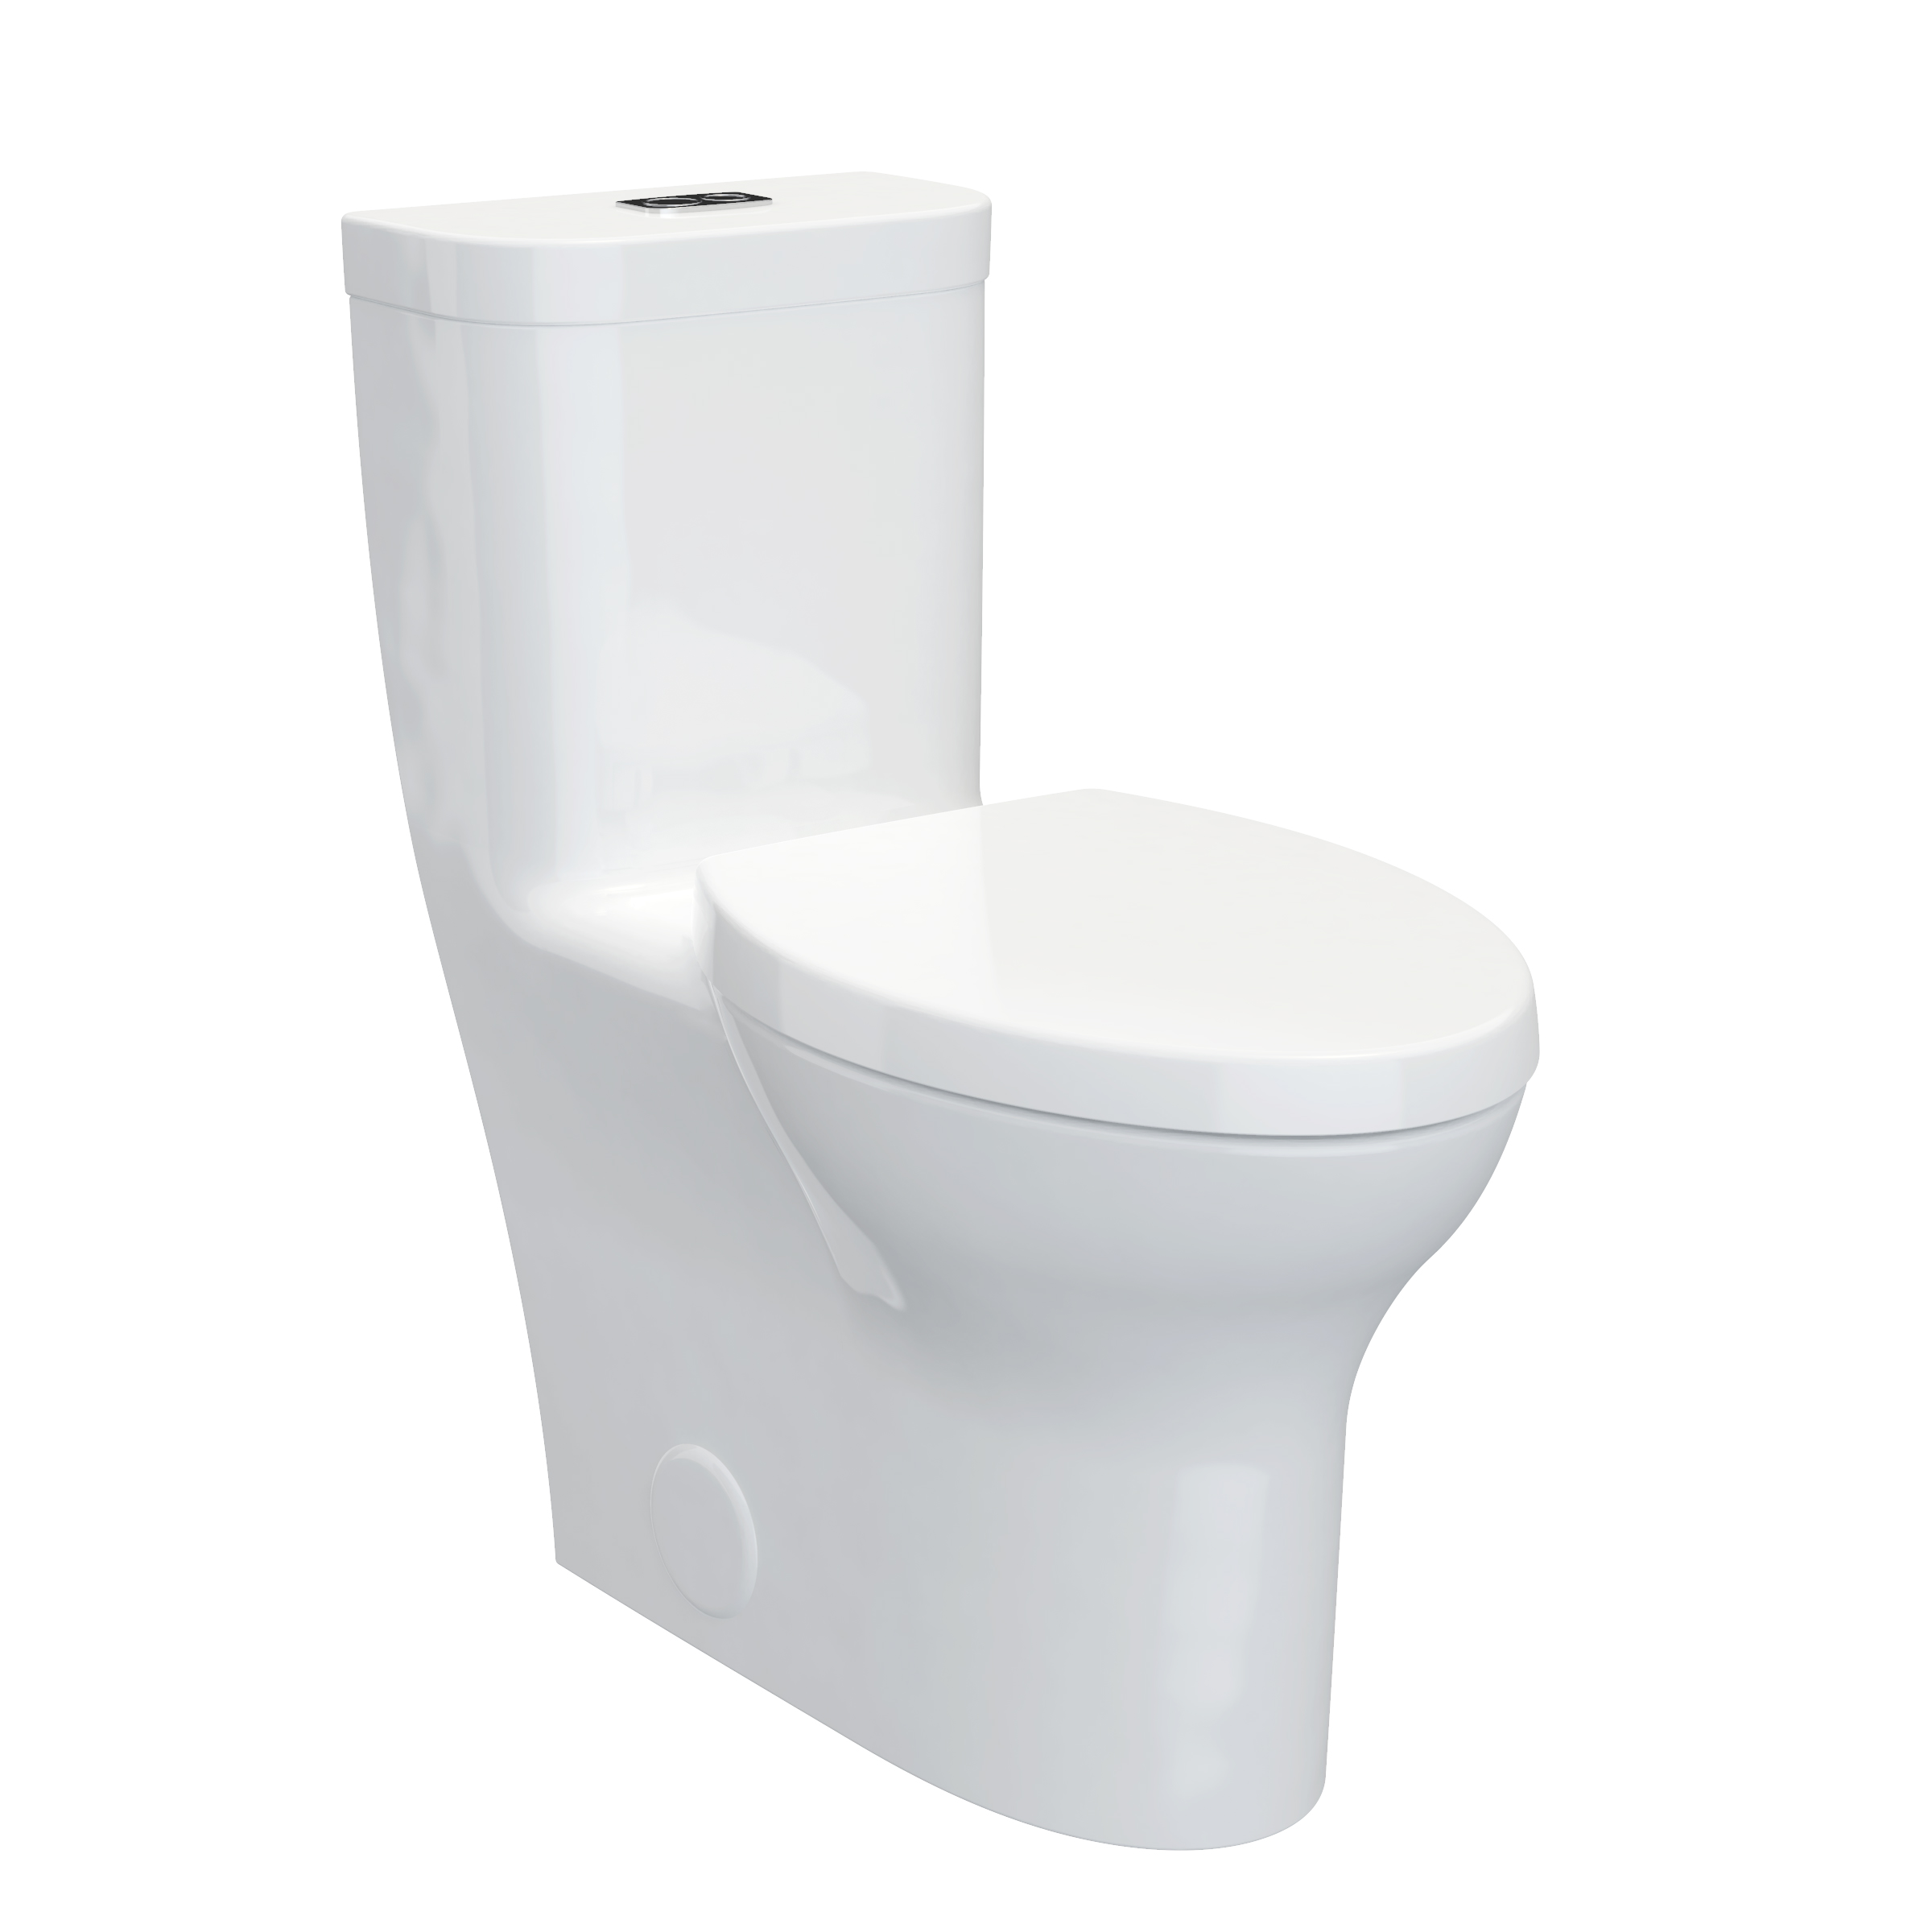 Equility® One-Piece Dual Flush Chair-Height Elongated Toilet with Seat